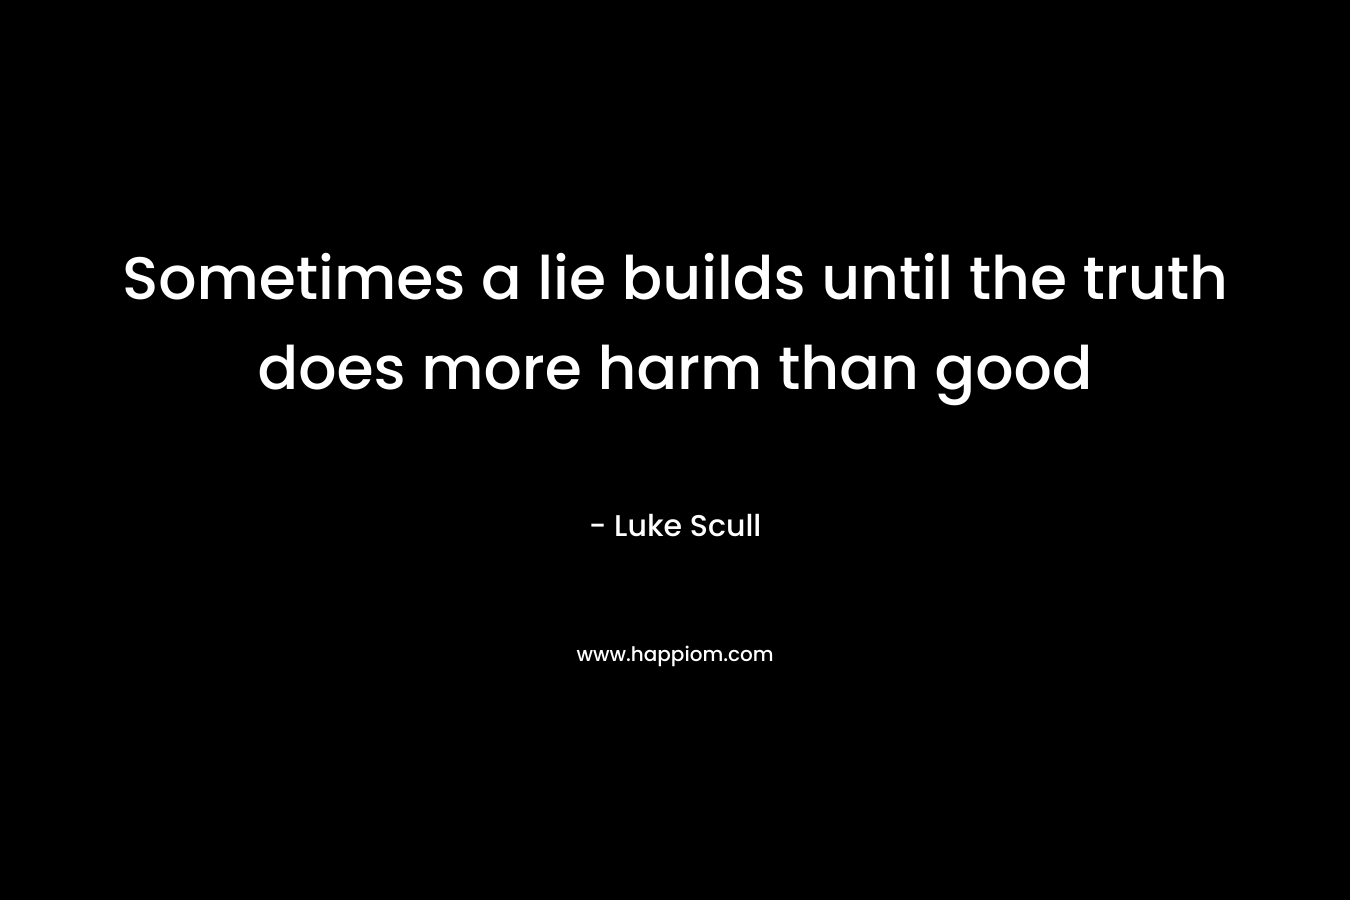 Sometimes a lie builds until the truth does more harm than good